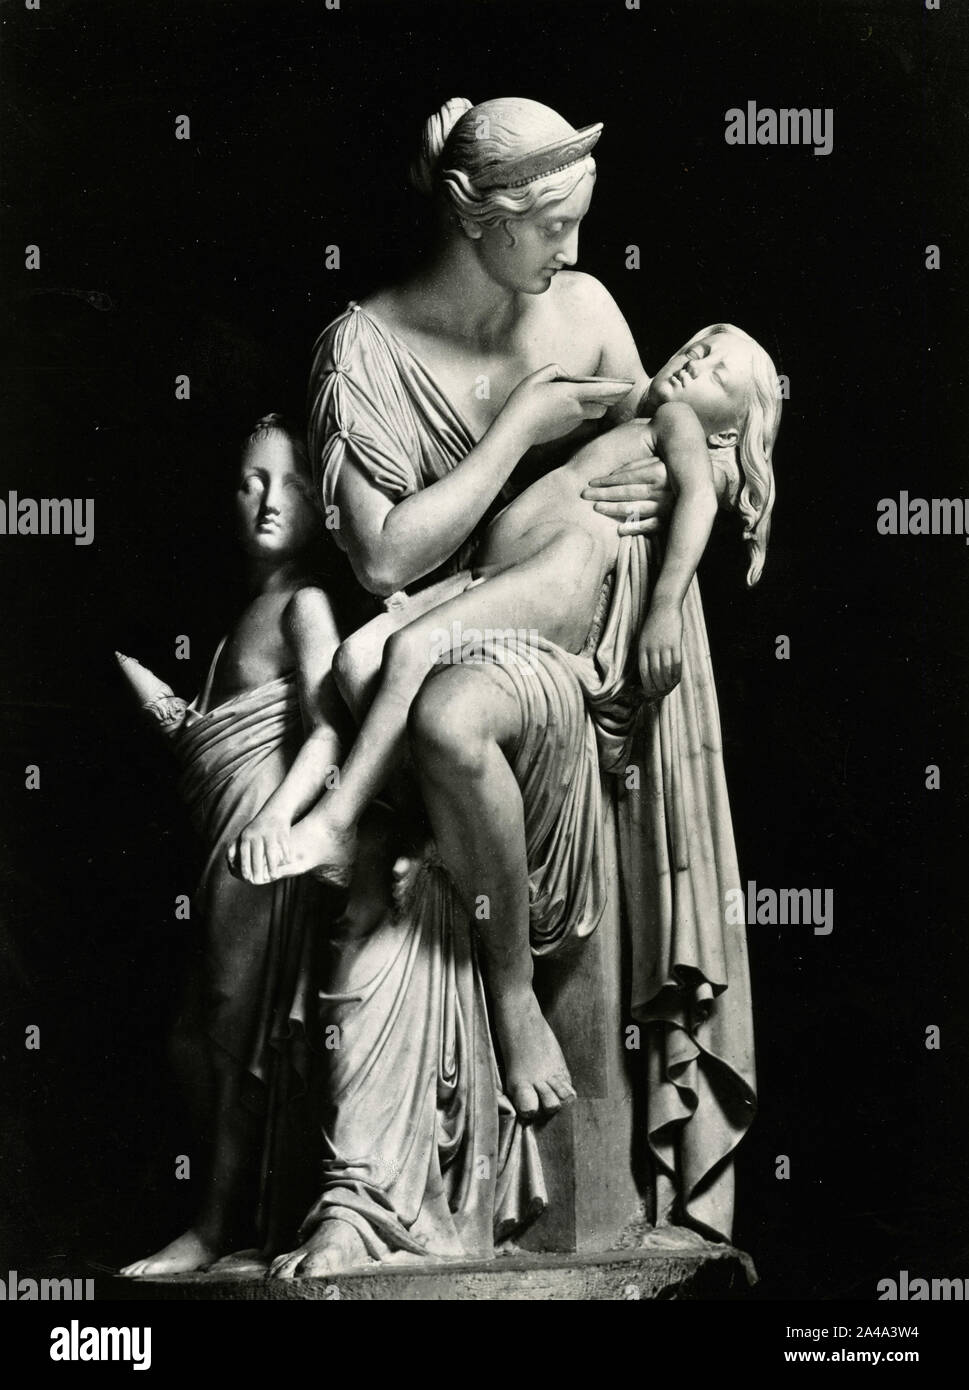 Mercy, detail of sculpture part of the Monument to Nikolai Demidoff, Florence, Italy 1930s Stock Photo